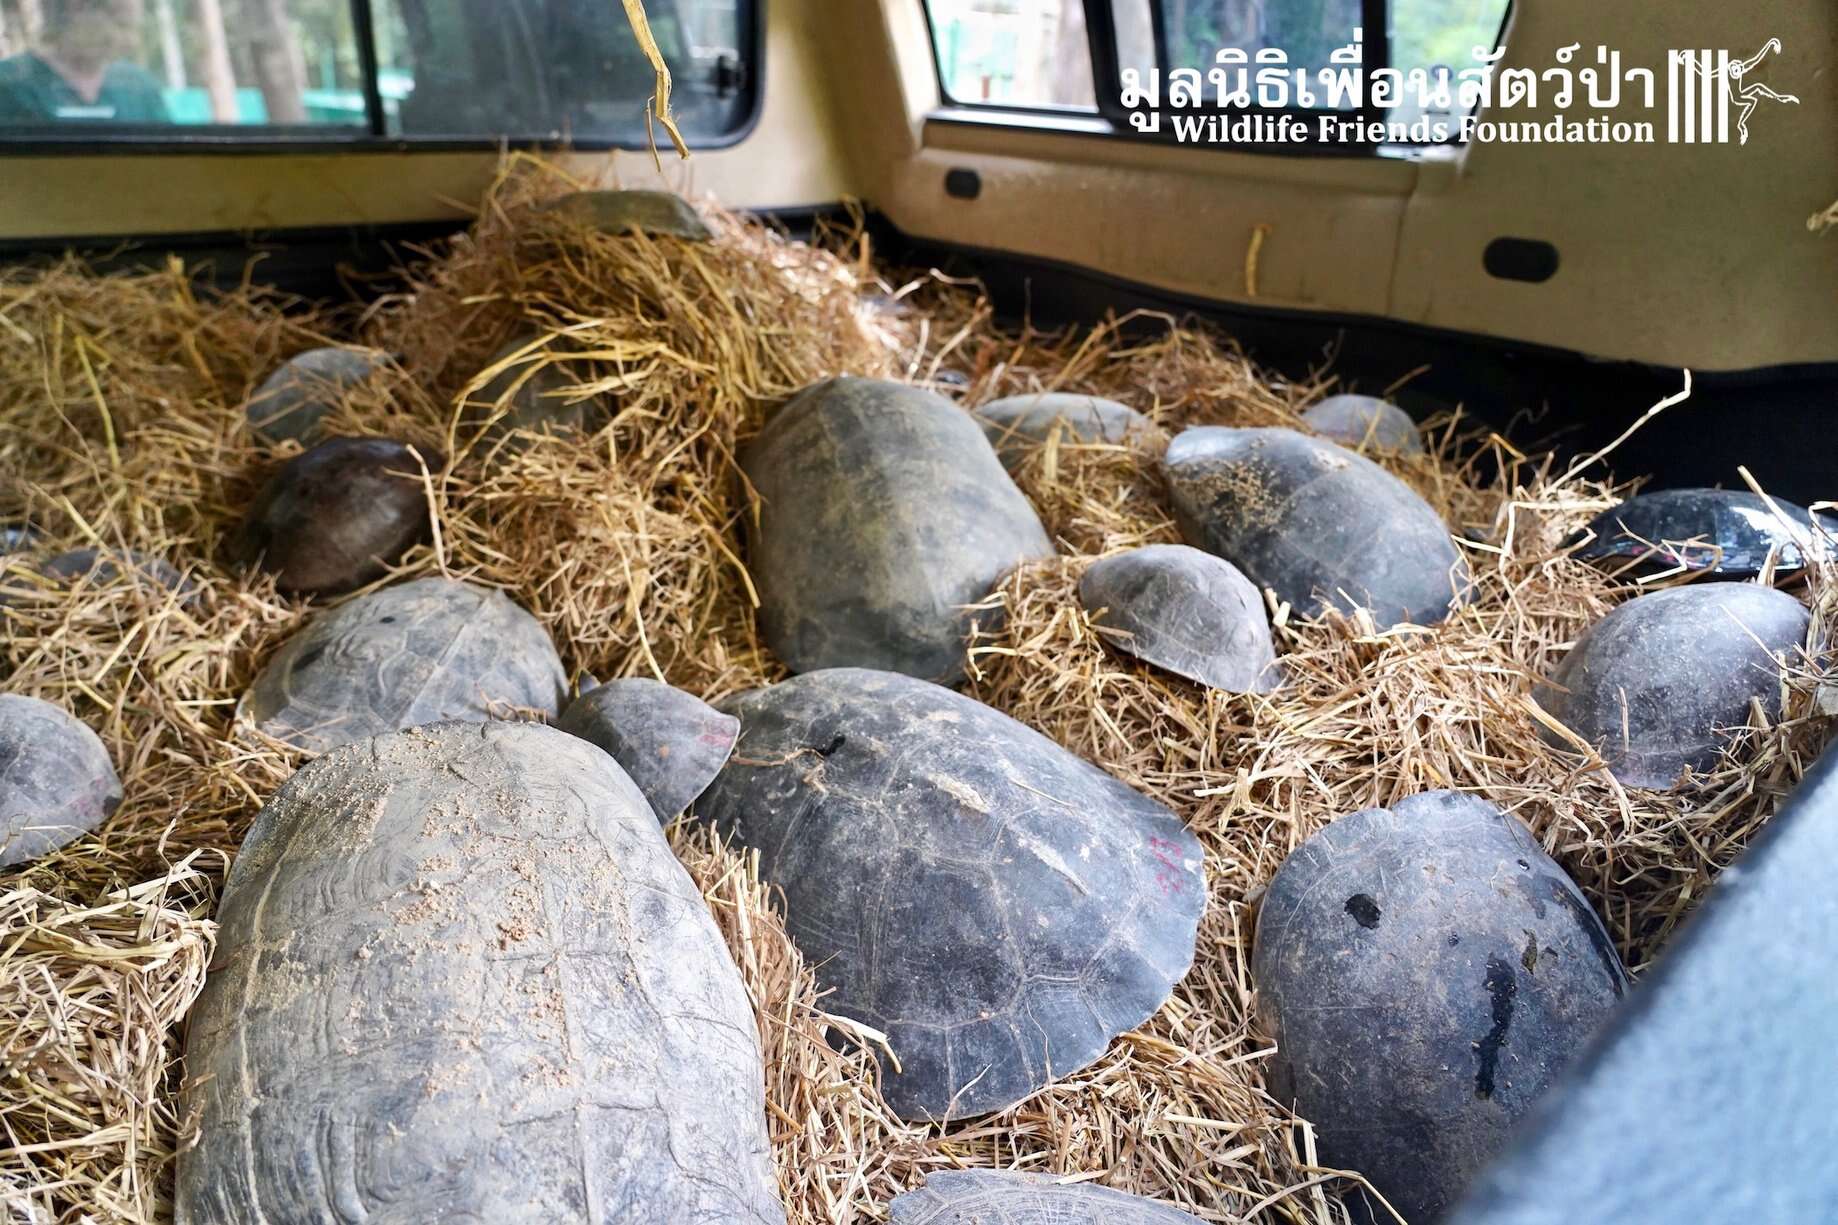 Turtles saved from temple in Thailand